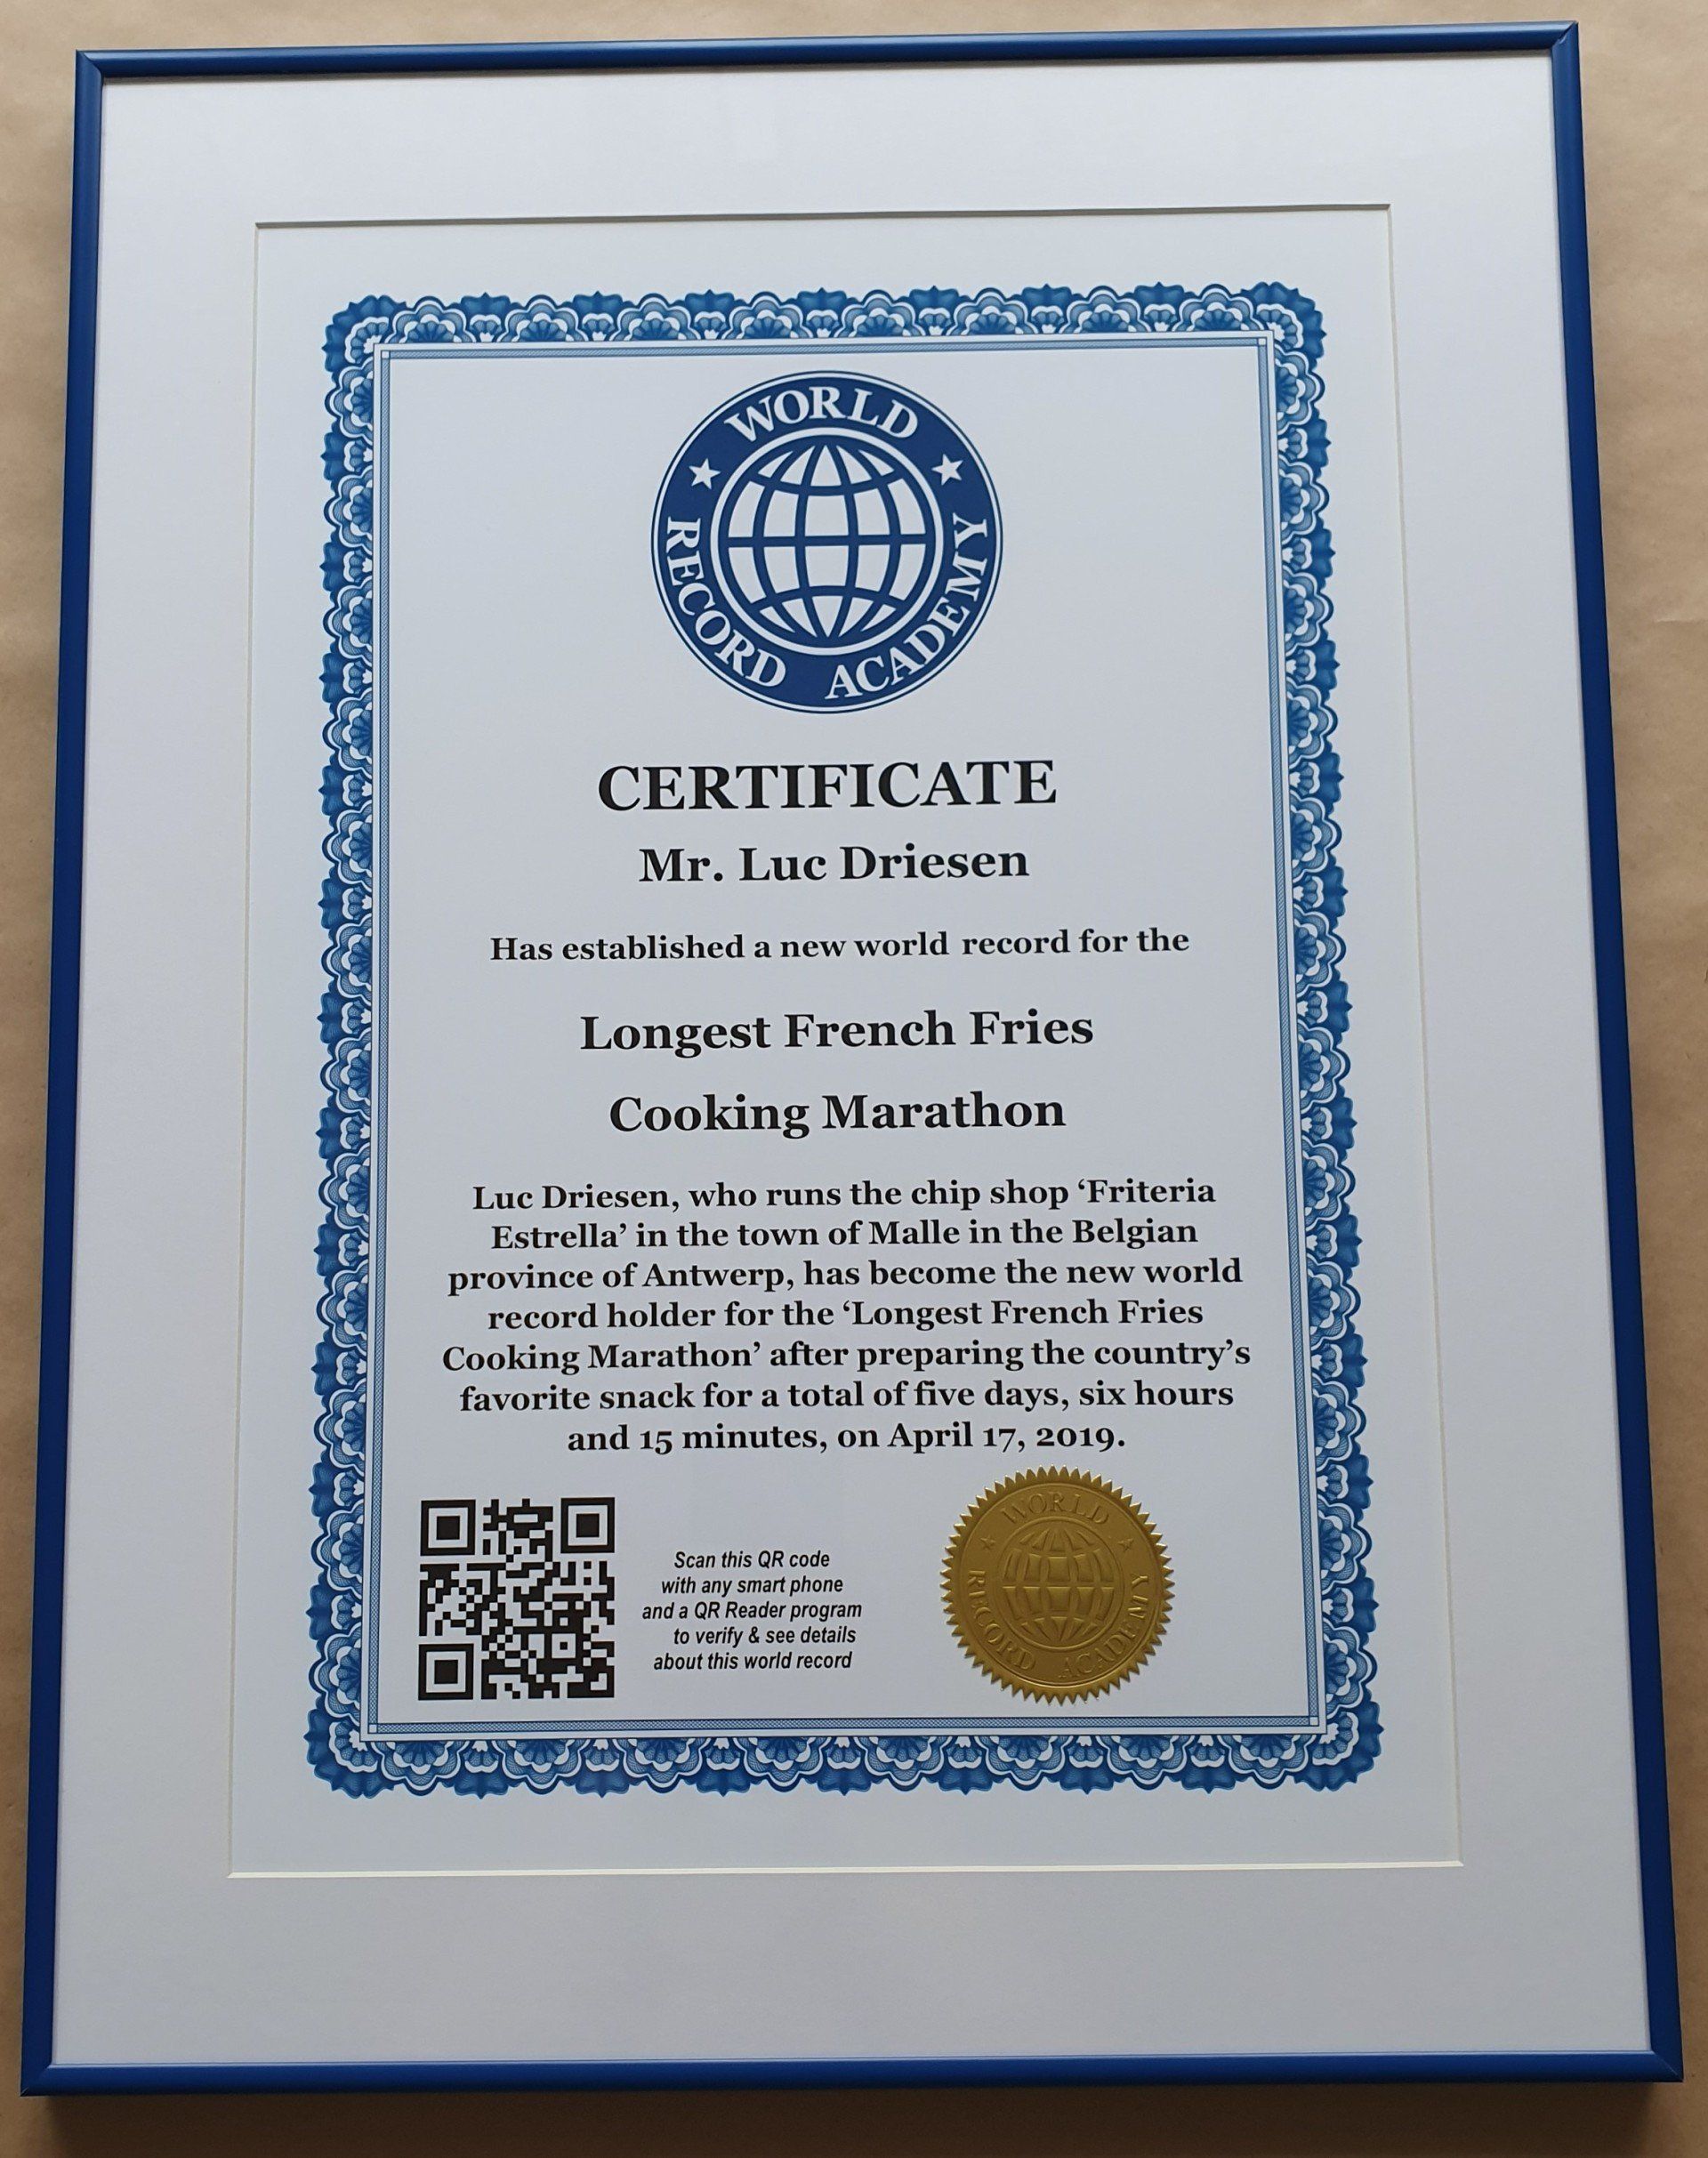  The world record certificate for the Longest French Fries Cooking Marathon.